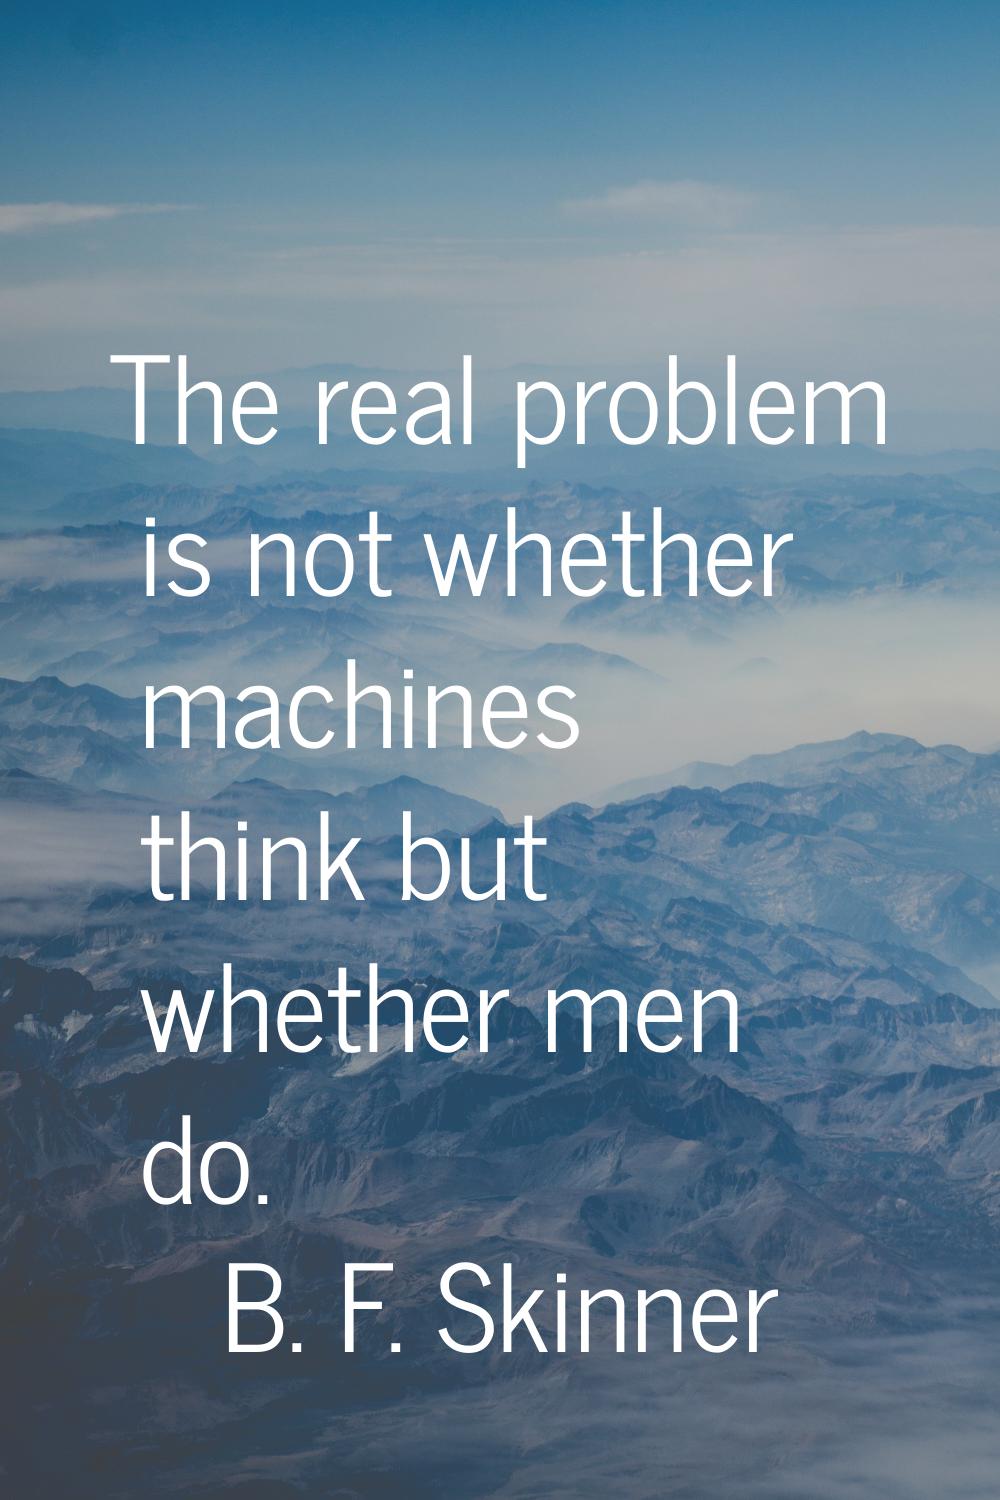 The real problem is not whether machines think but whether men do.